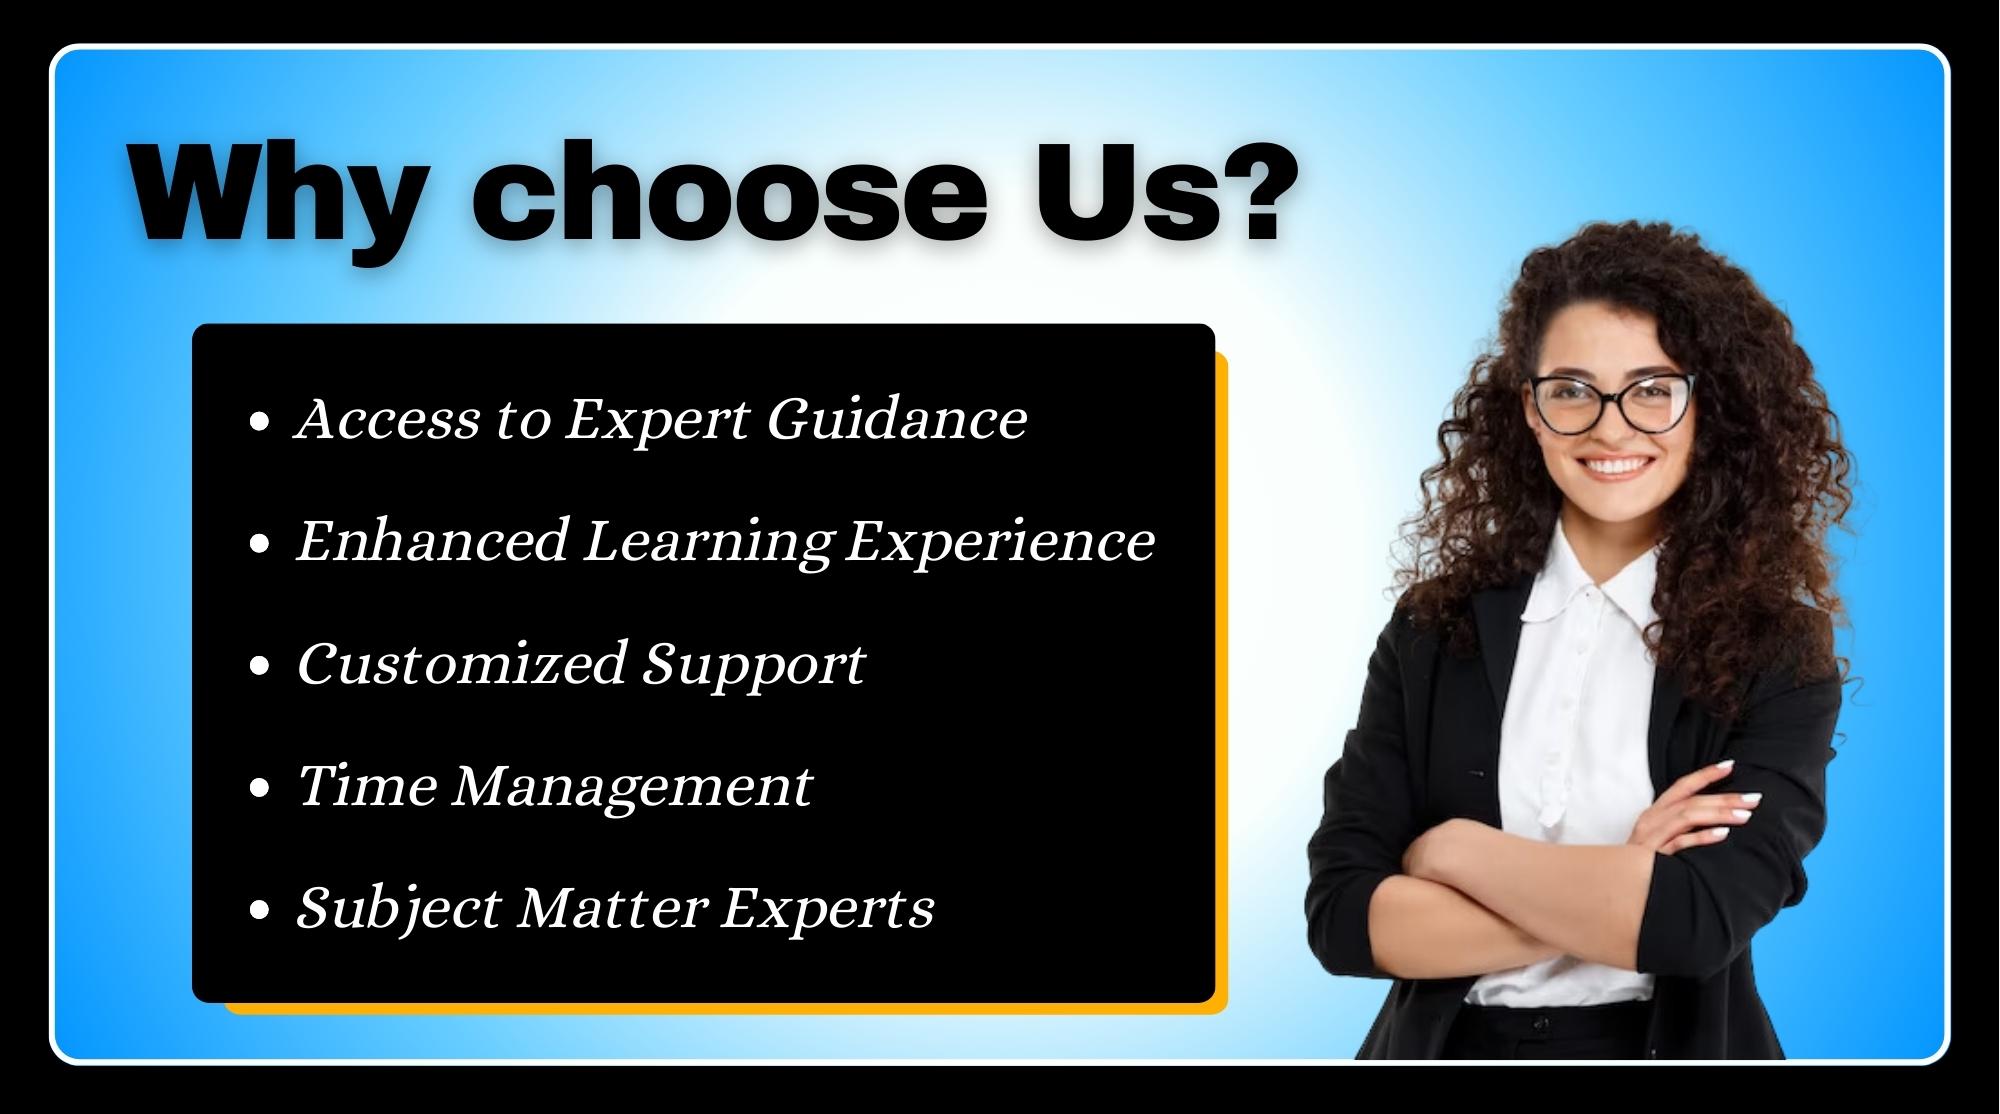 Online Homework Help - Expert Guidance - Enhance Leaning Experience - Customize Support - Time Management - All Subject Experts